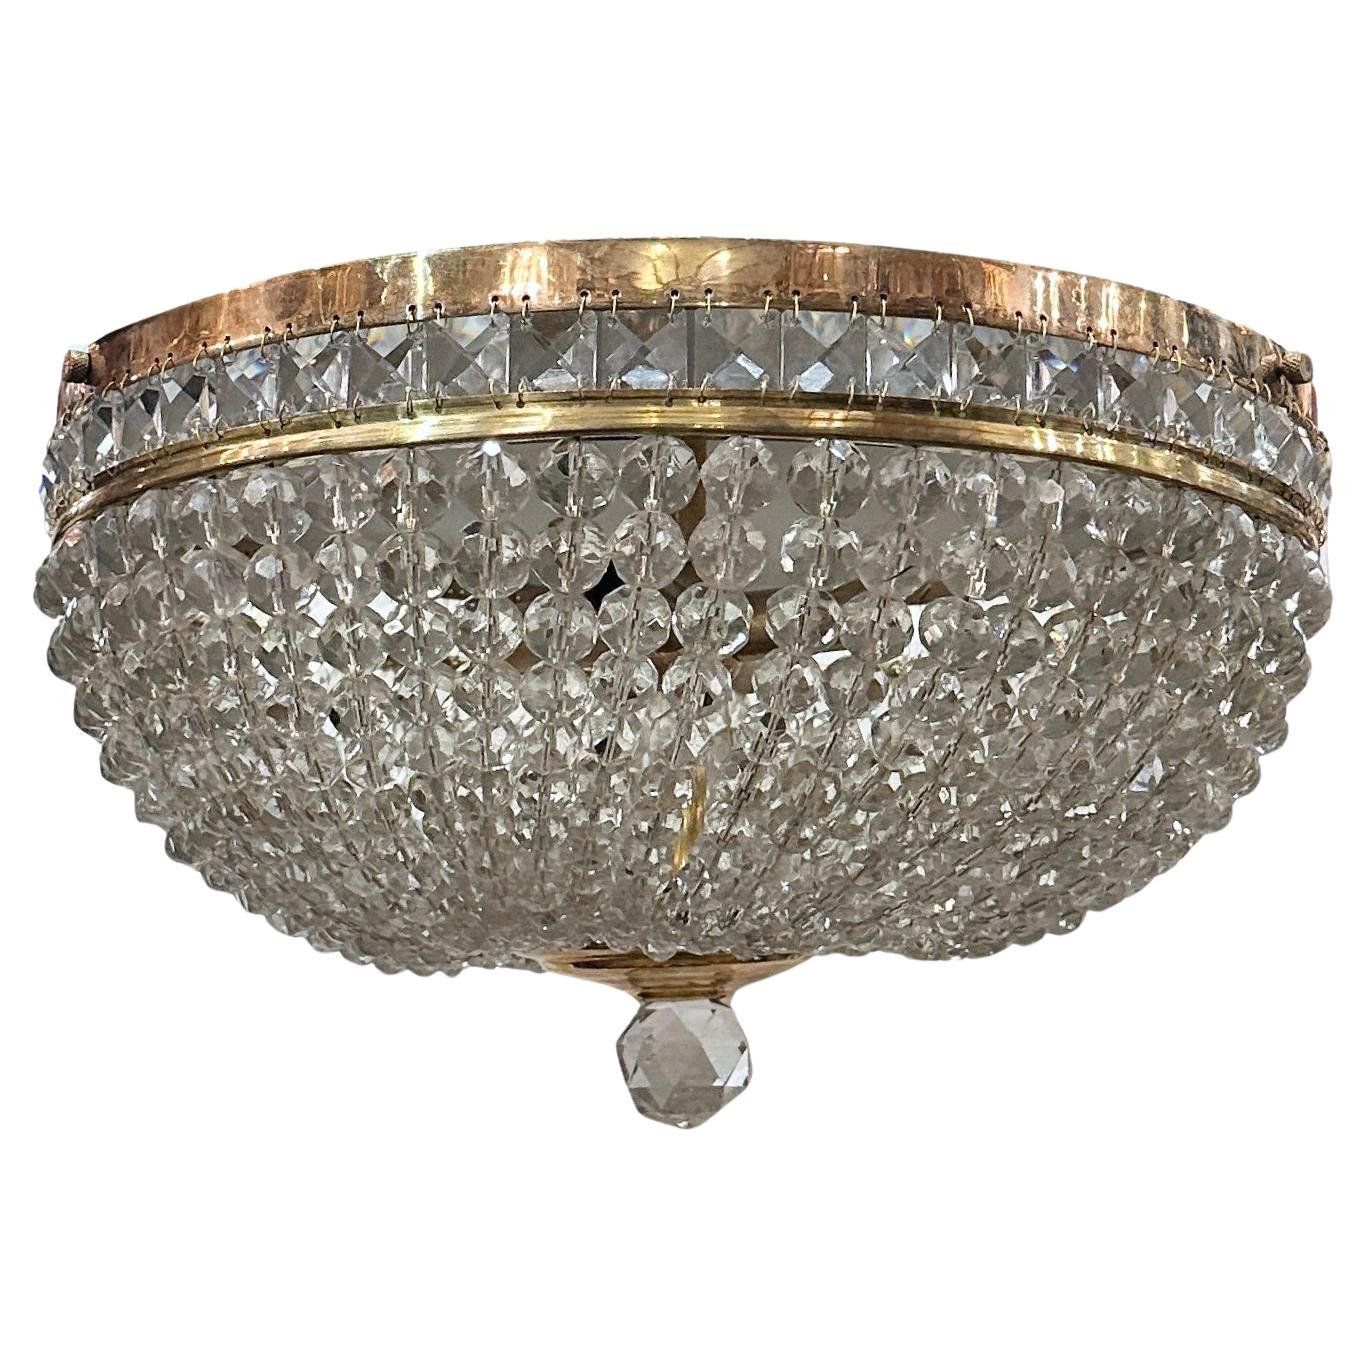 Set of Beaded Crystal Light Fixtures, Sold Individually